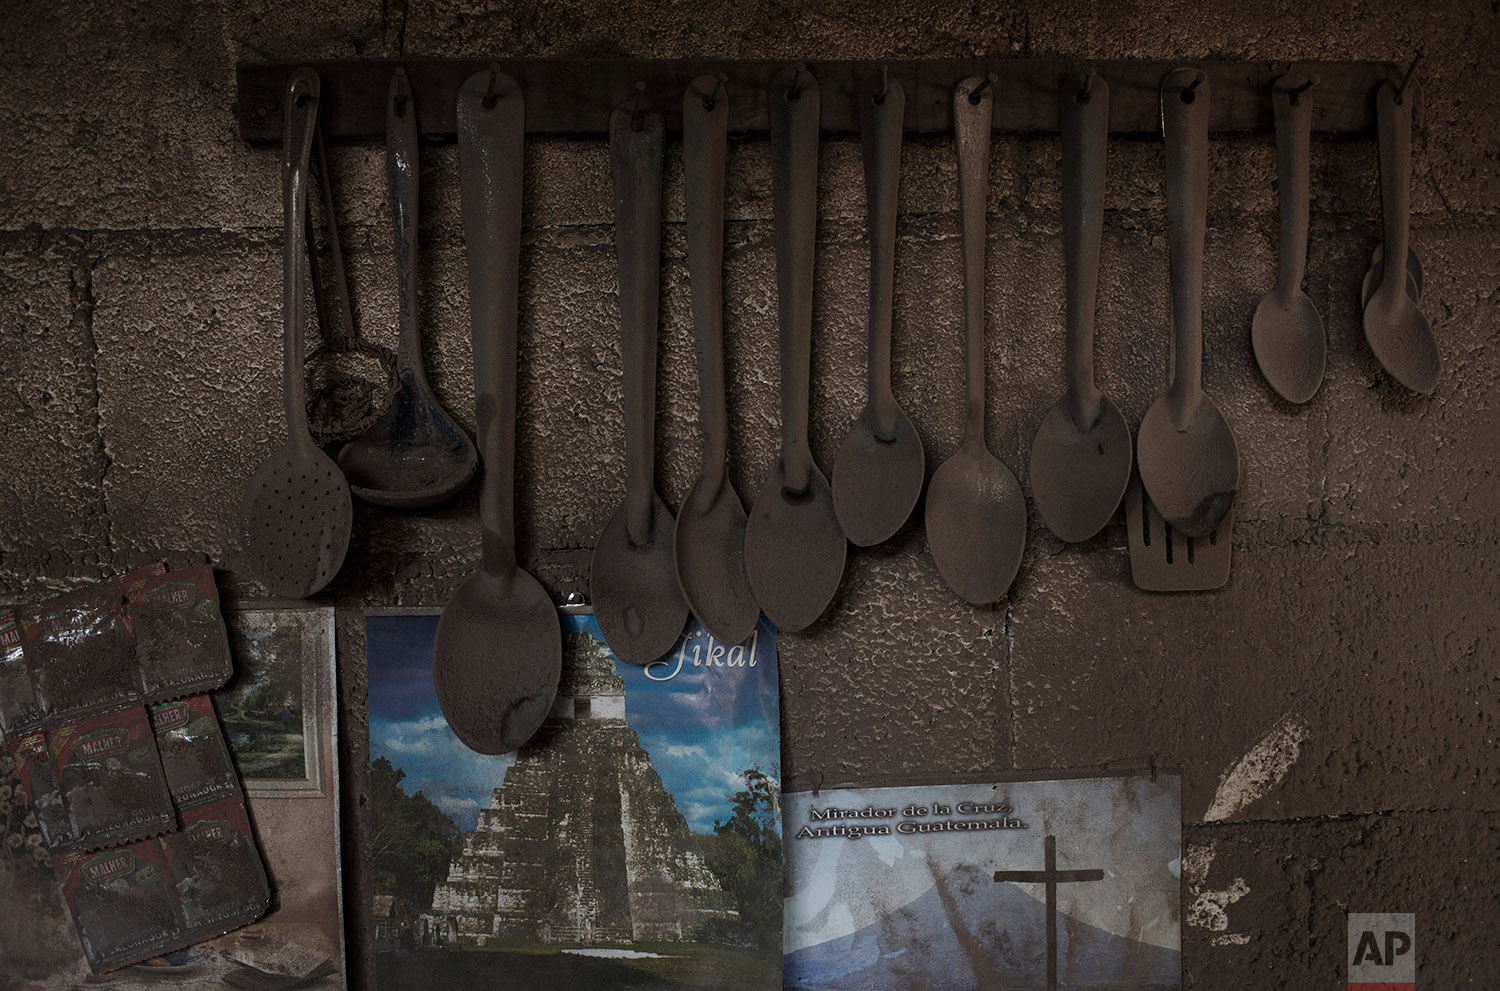  This June 9, 2018 photo shows kitchen utensils hanging above posters promoting the Mayan ruins Tikal and the Mirador de la Cruz, dusted with volcanic ash spewed by the Volcan de Fuego or Volcano of Fire, in San Miguel Los Lotes, Guatemala. (AP Photo